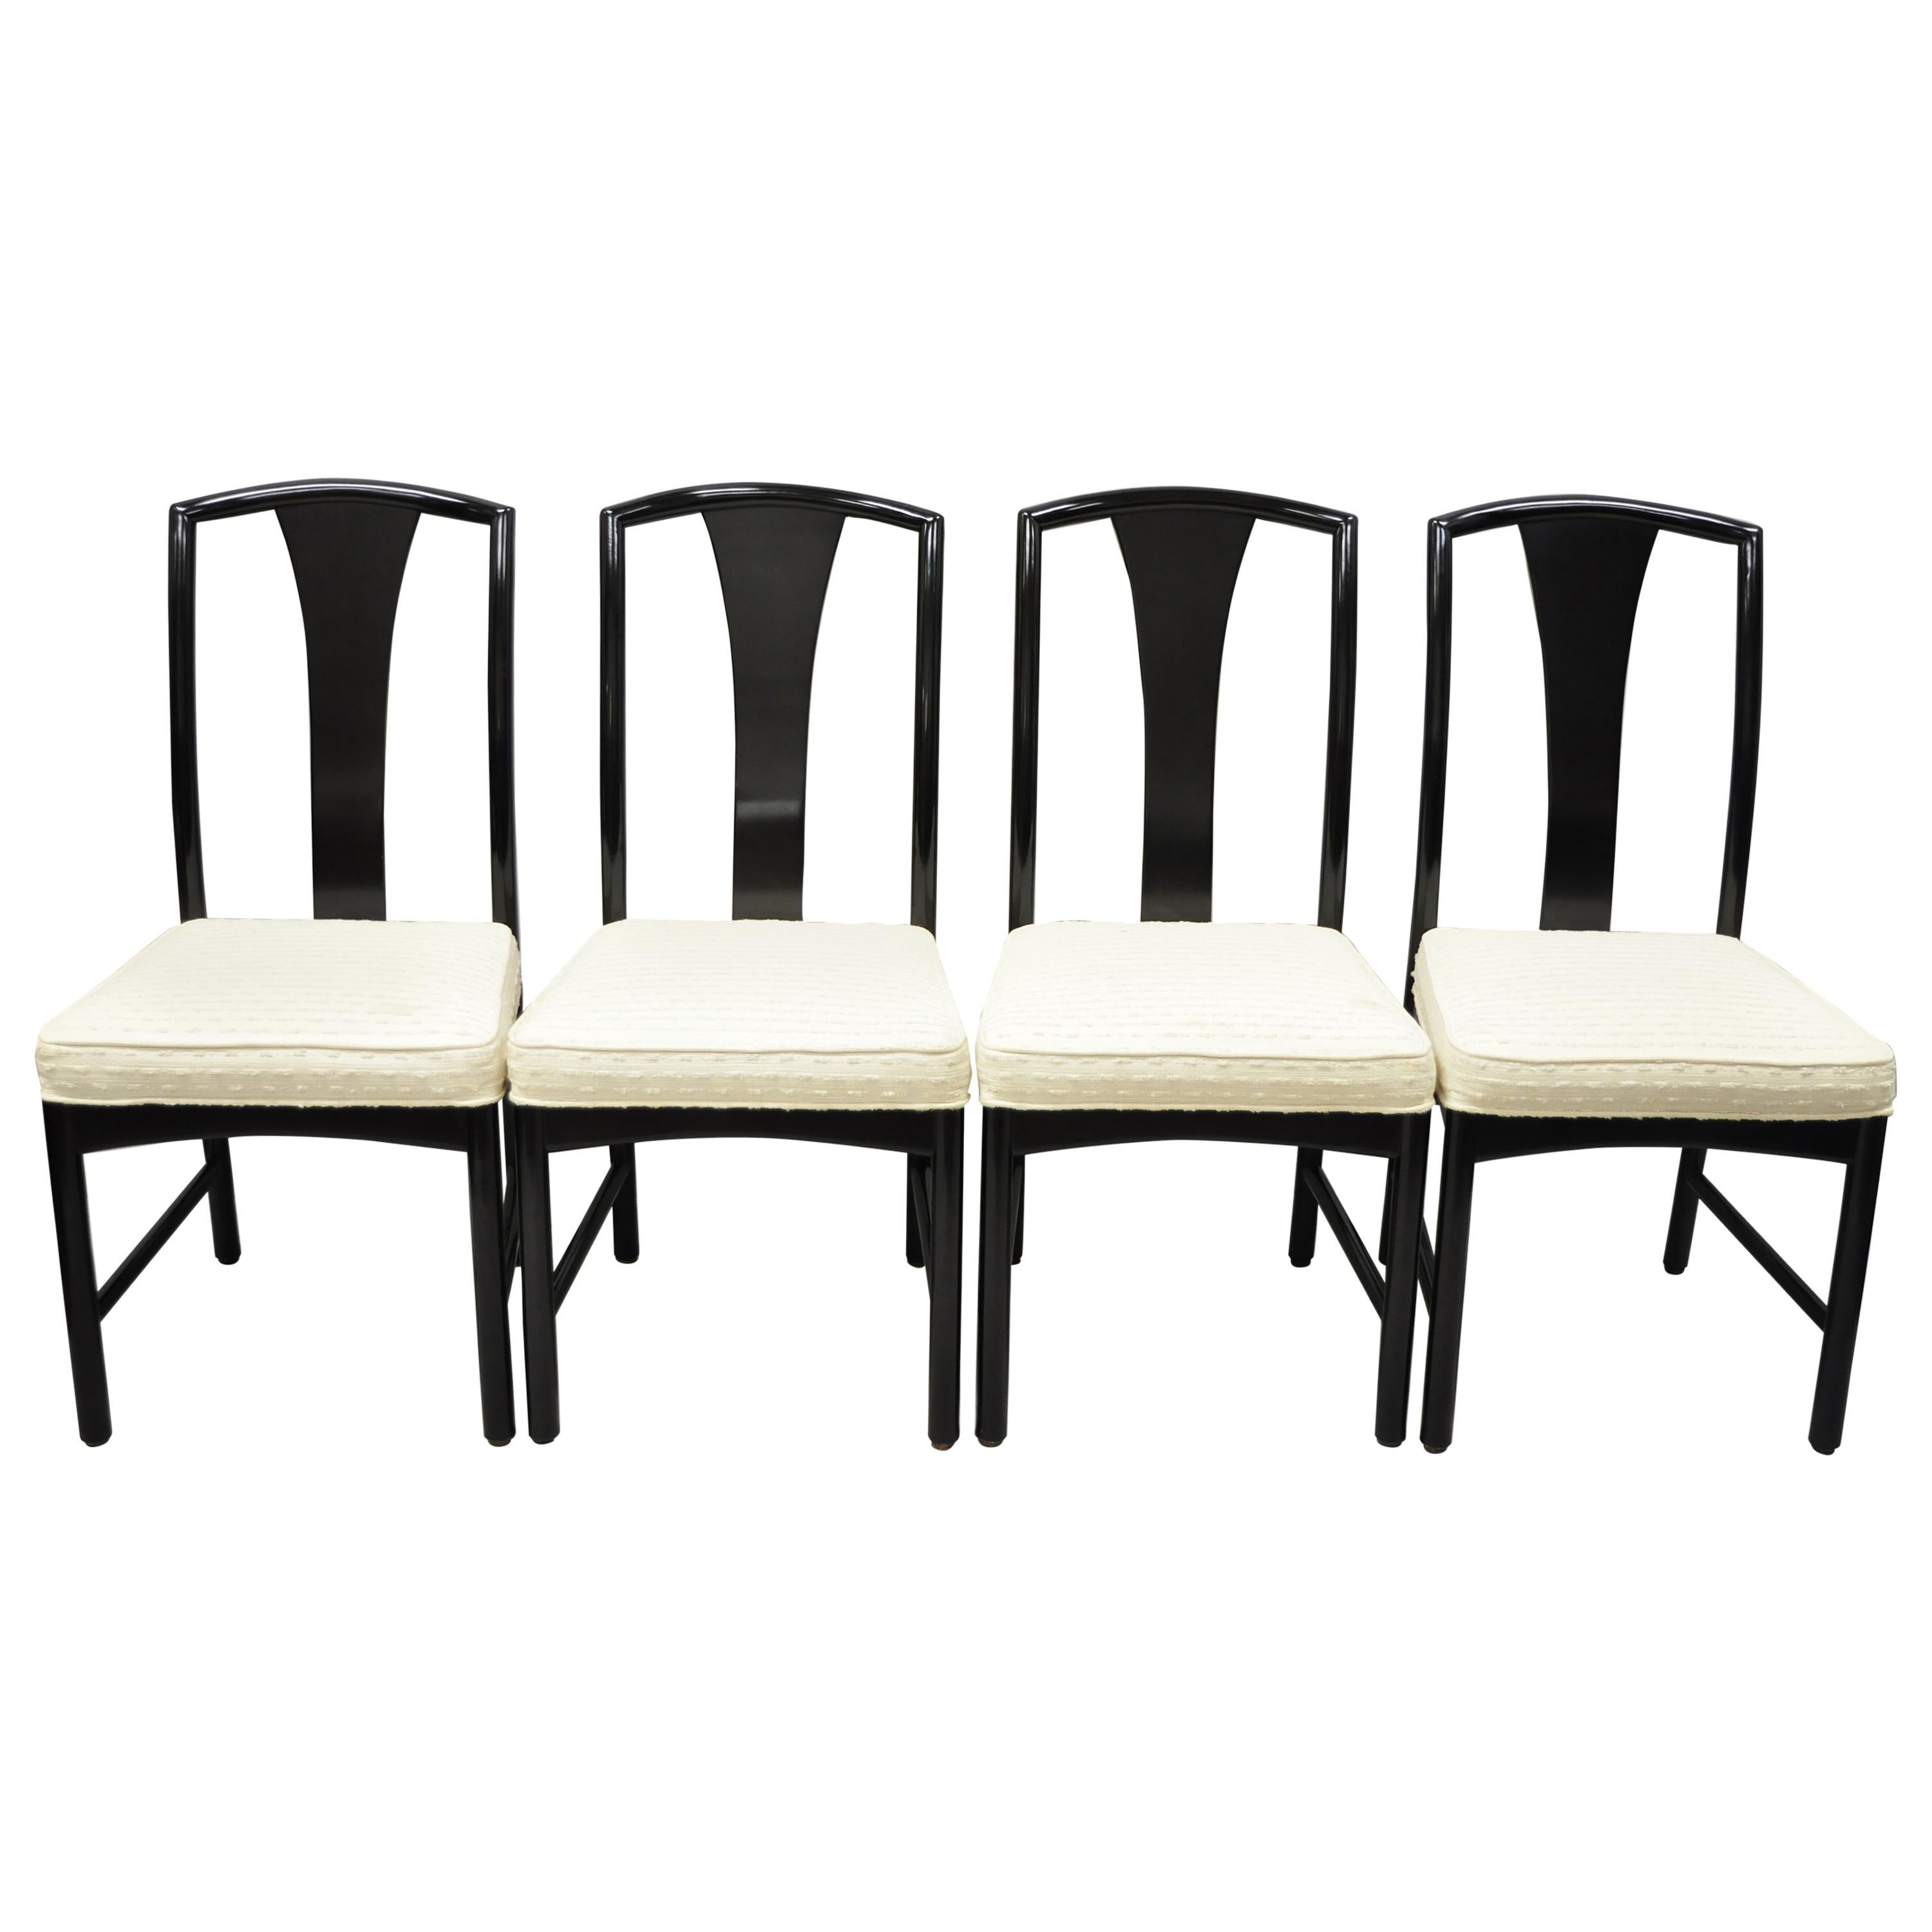 Chinoiserie Century Chair Co Black, Black Chinoiserie Dining Chairs Egypt